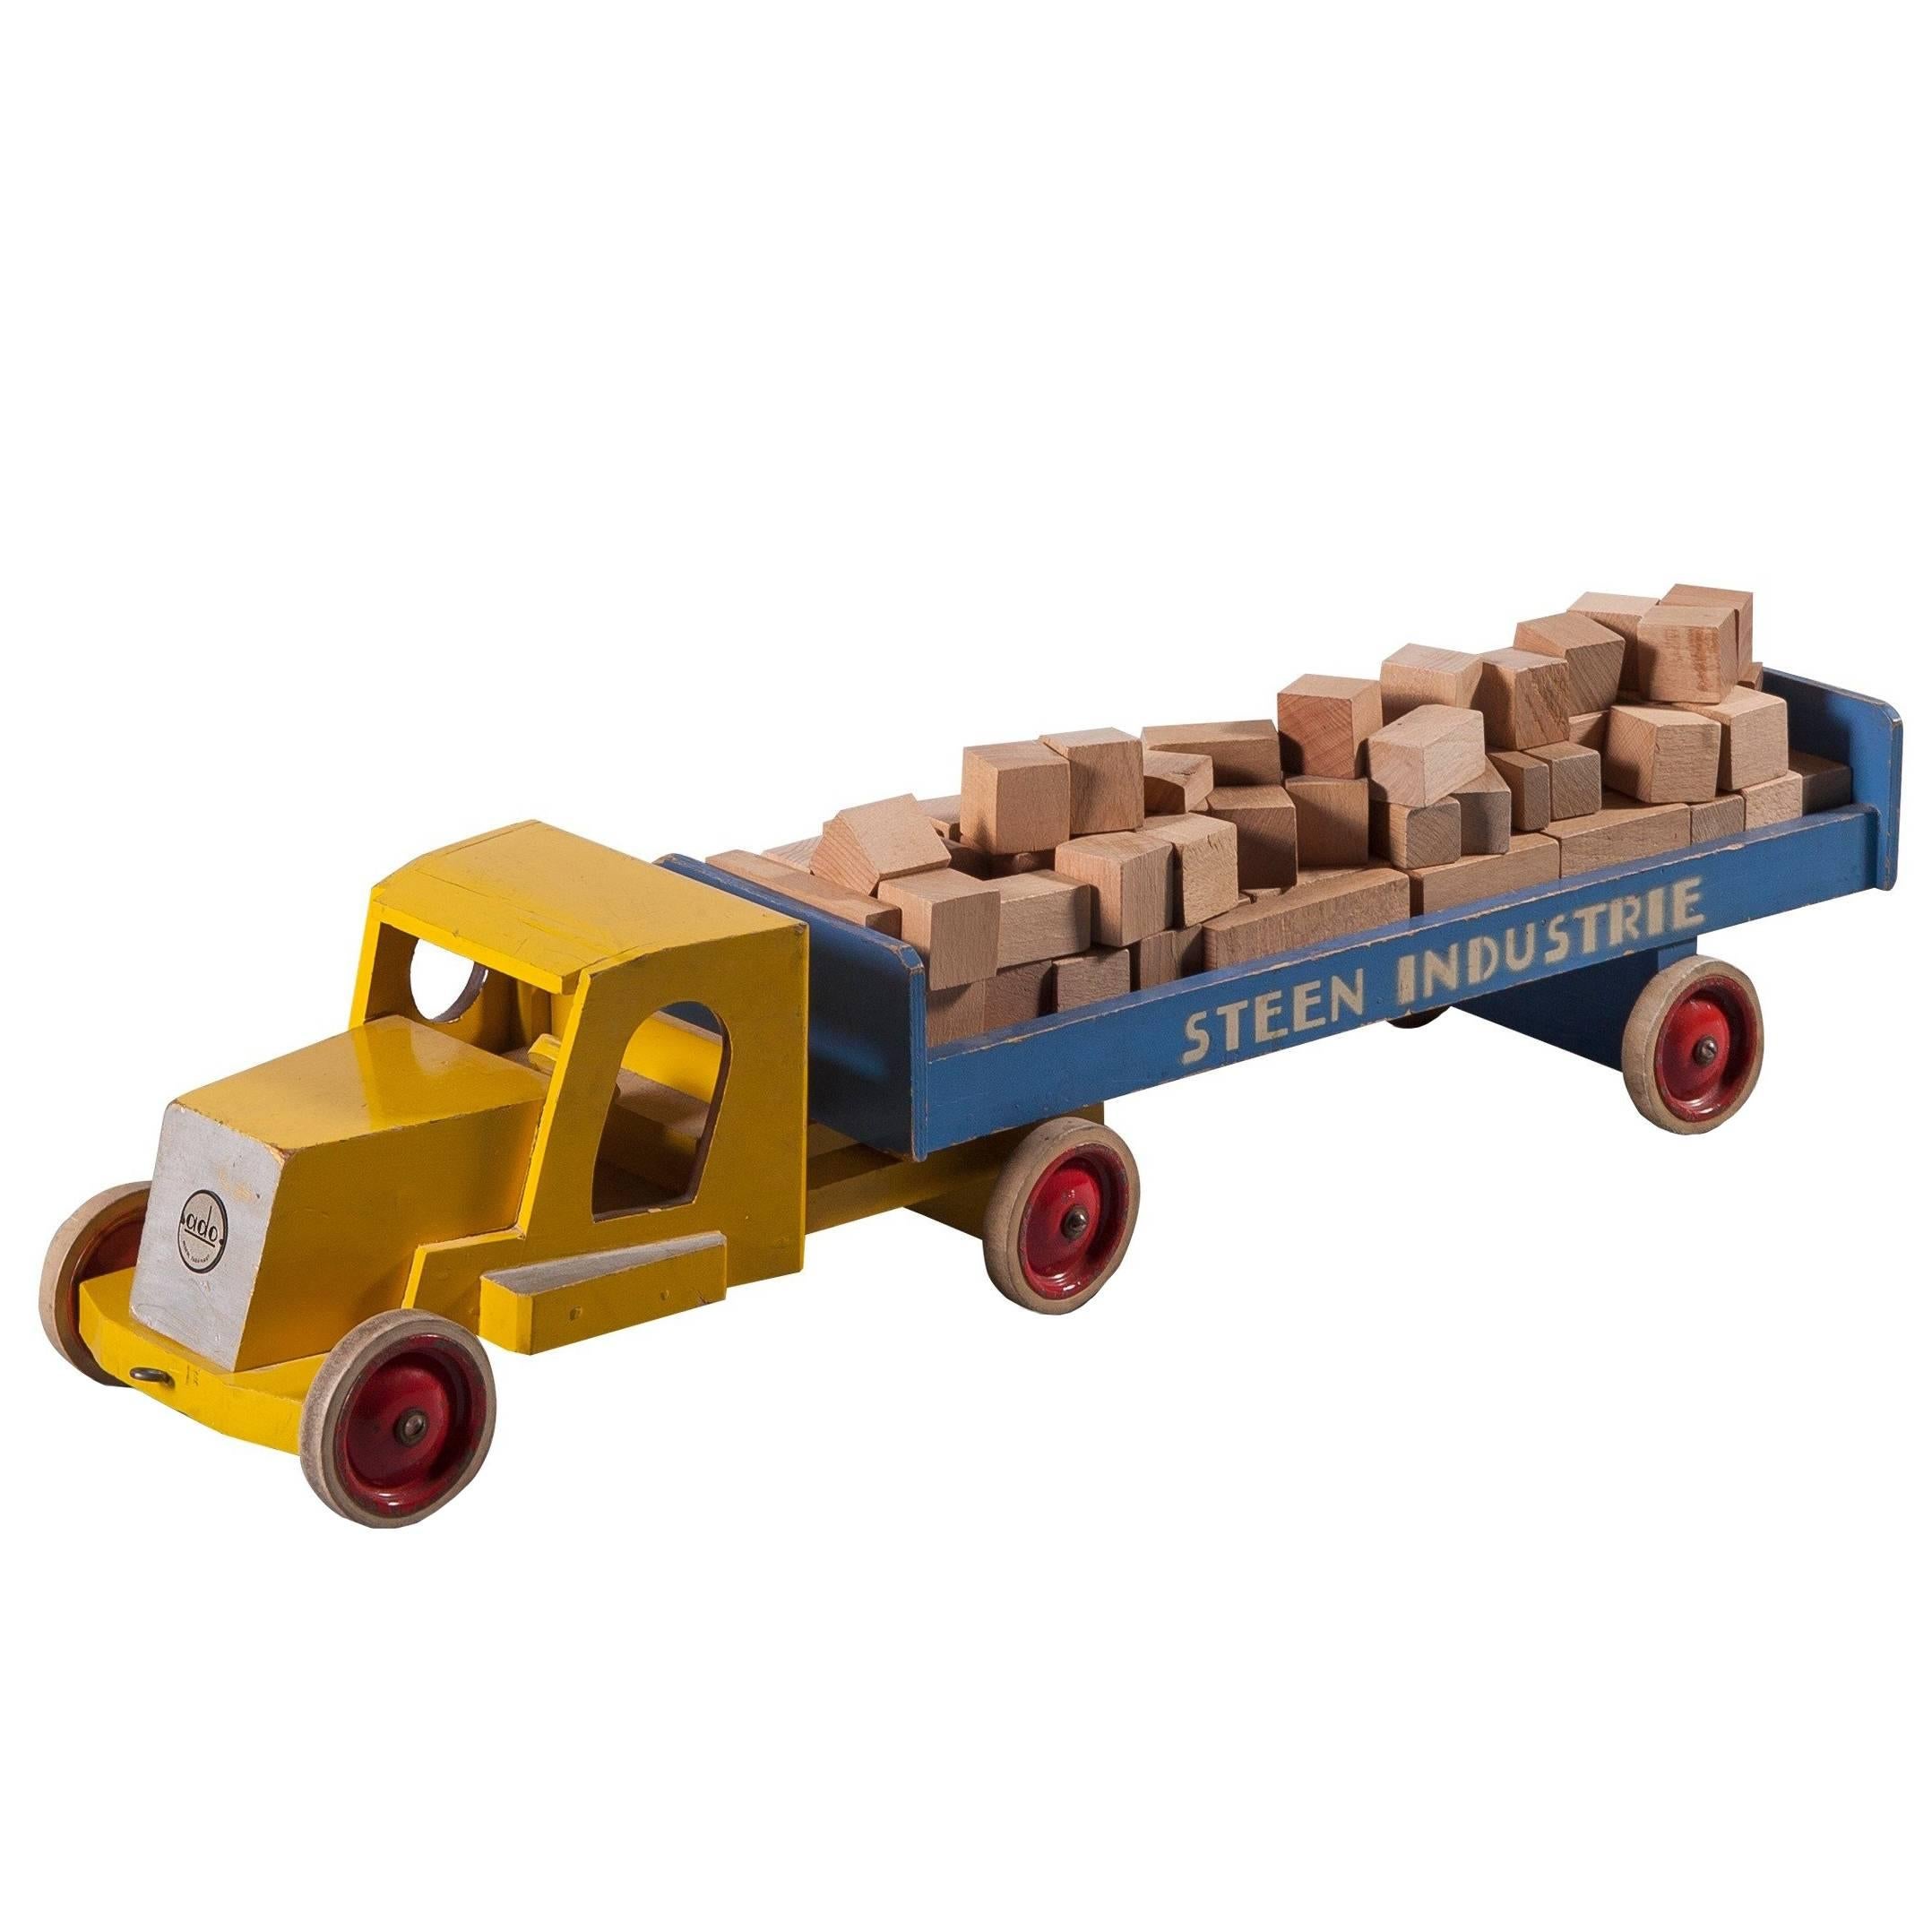 ADO and Ko Verzuu No. 2 "Steen Industrie Truck" in Wood and Metal, circa 1950s